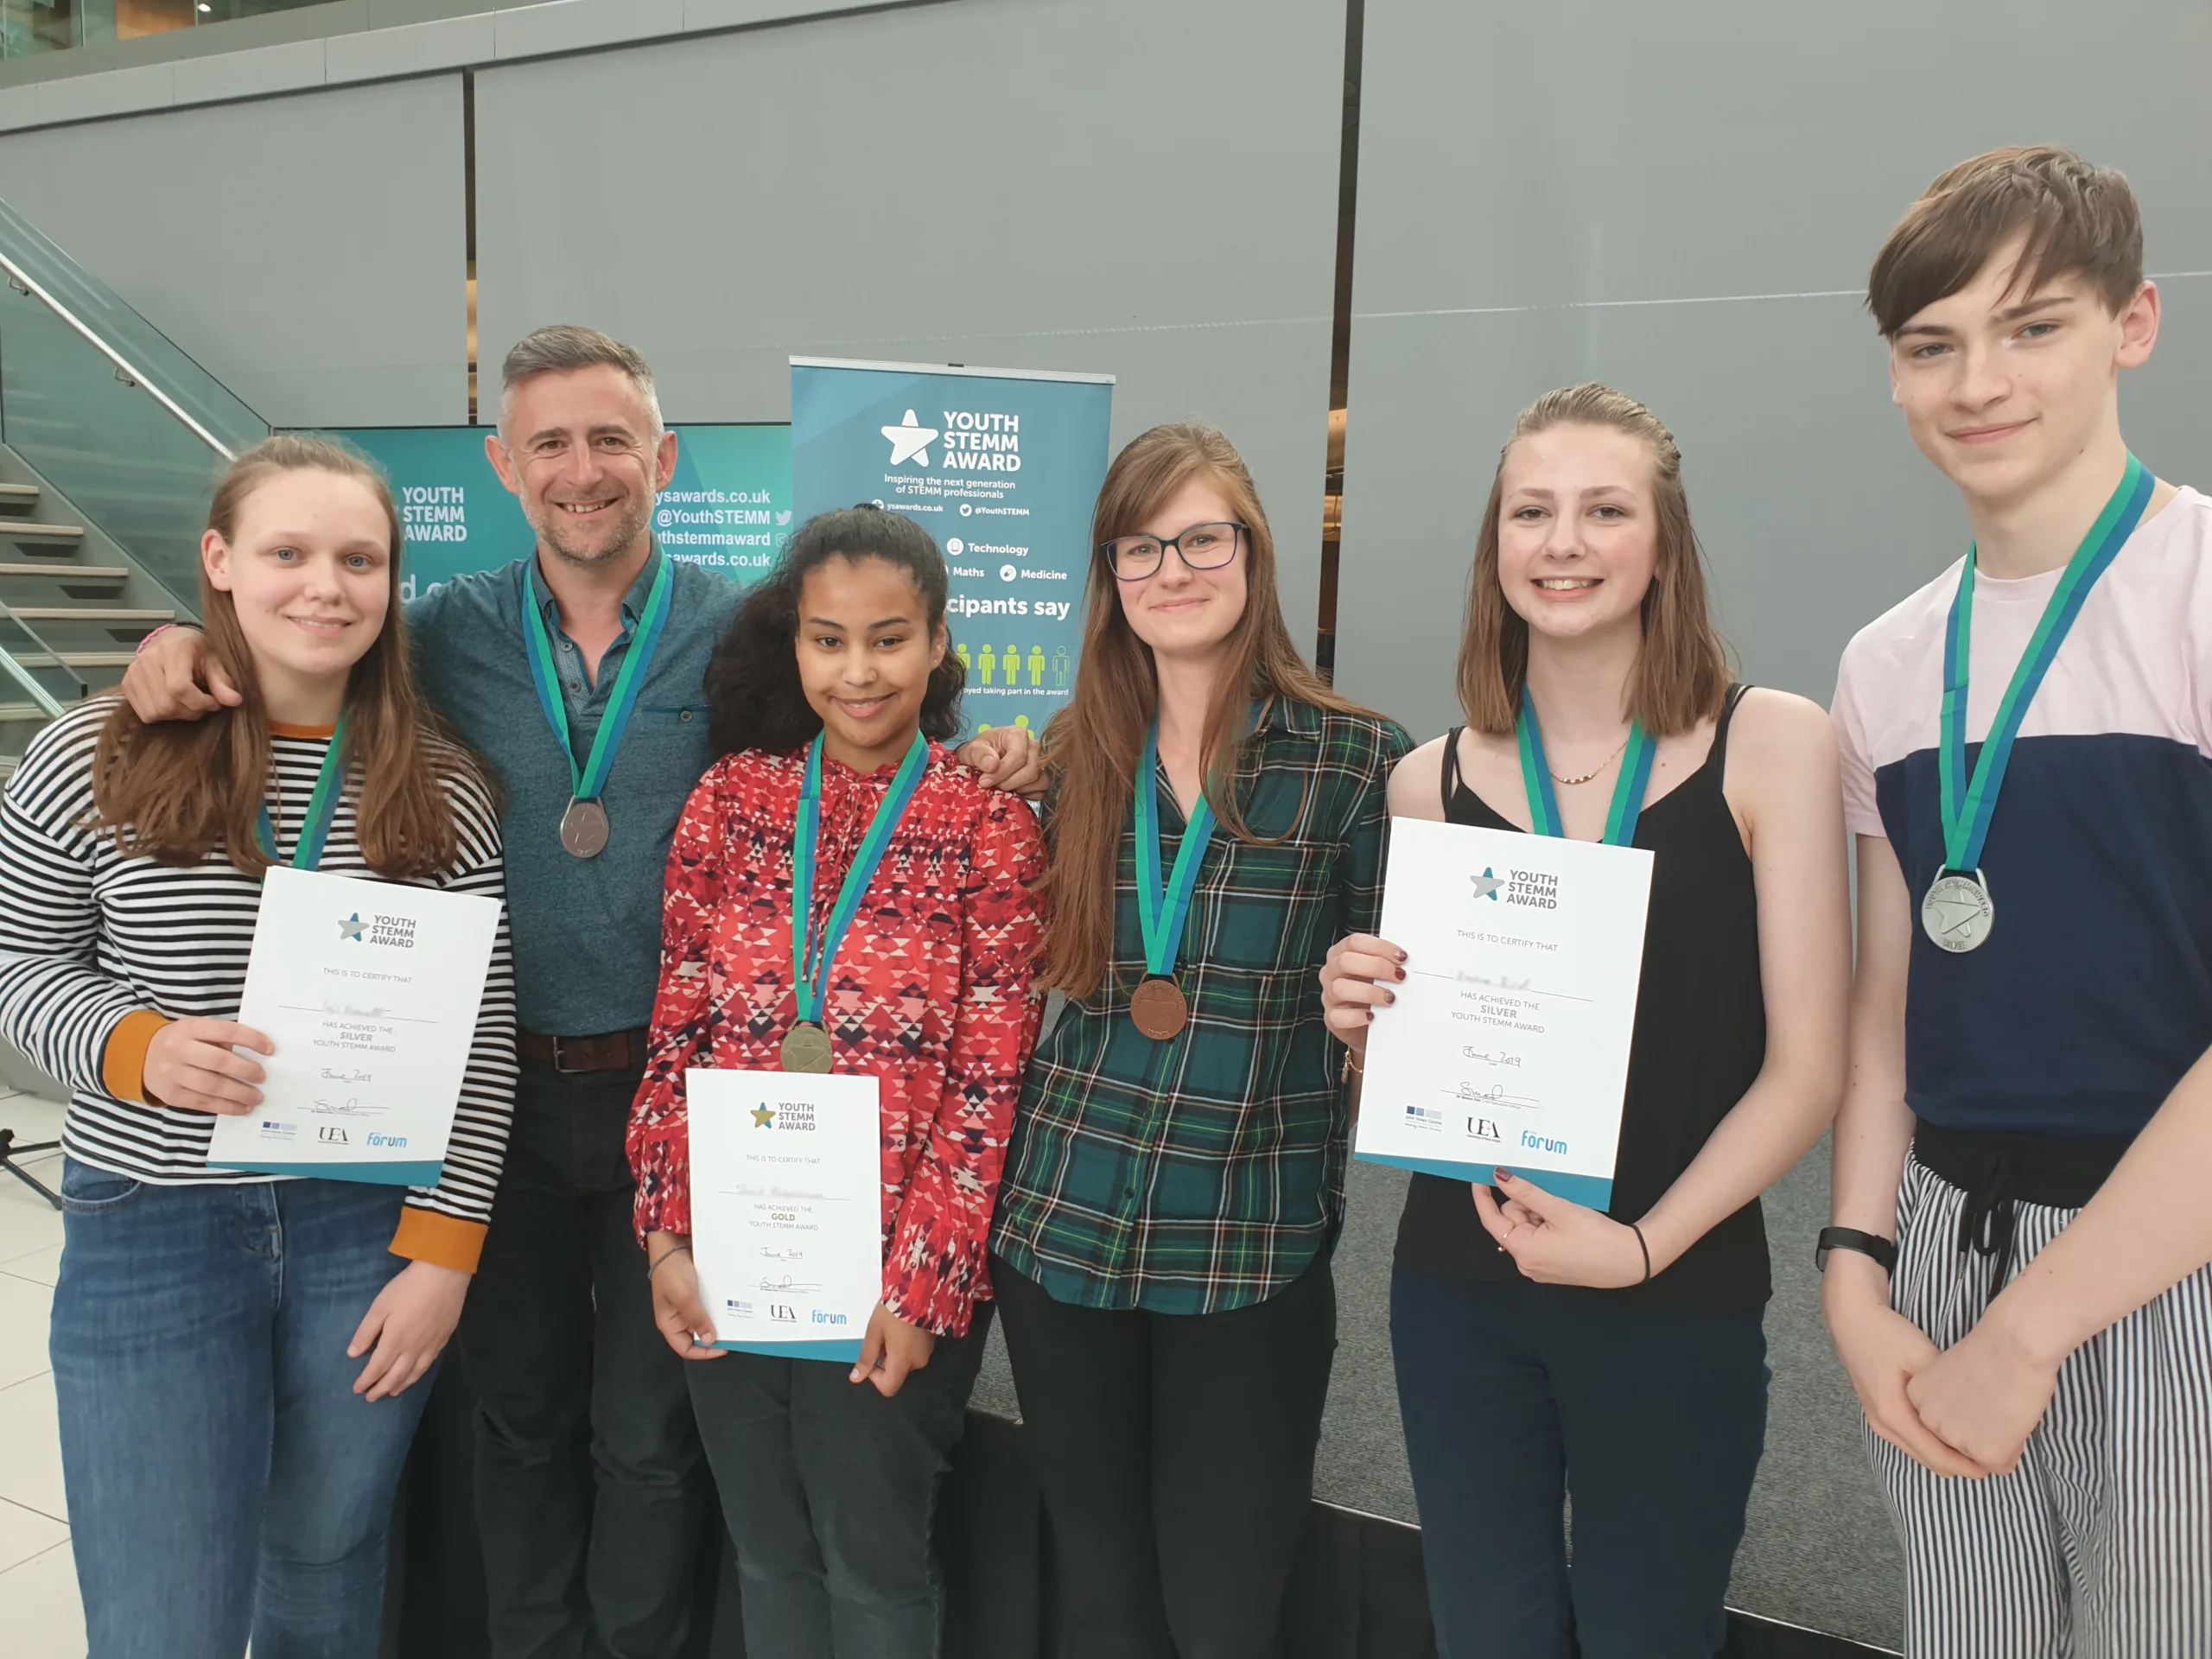 Image caption: Young people receiving their Youth STEMM Award medal from YSA ambassador Mark Thompson (BBC Stargazing Live broadcaster and author). Image credit: John Innes Centre.